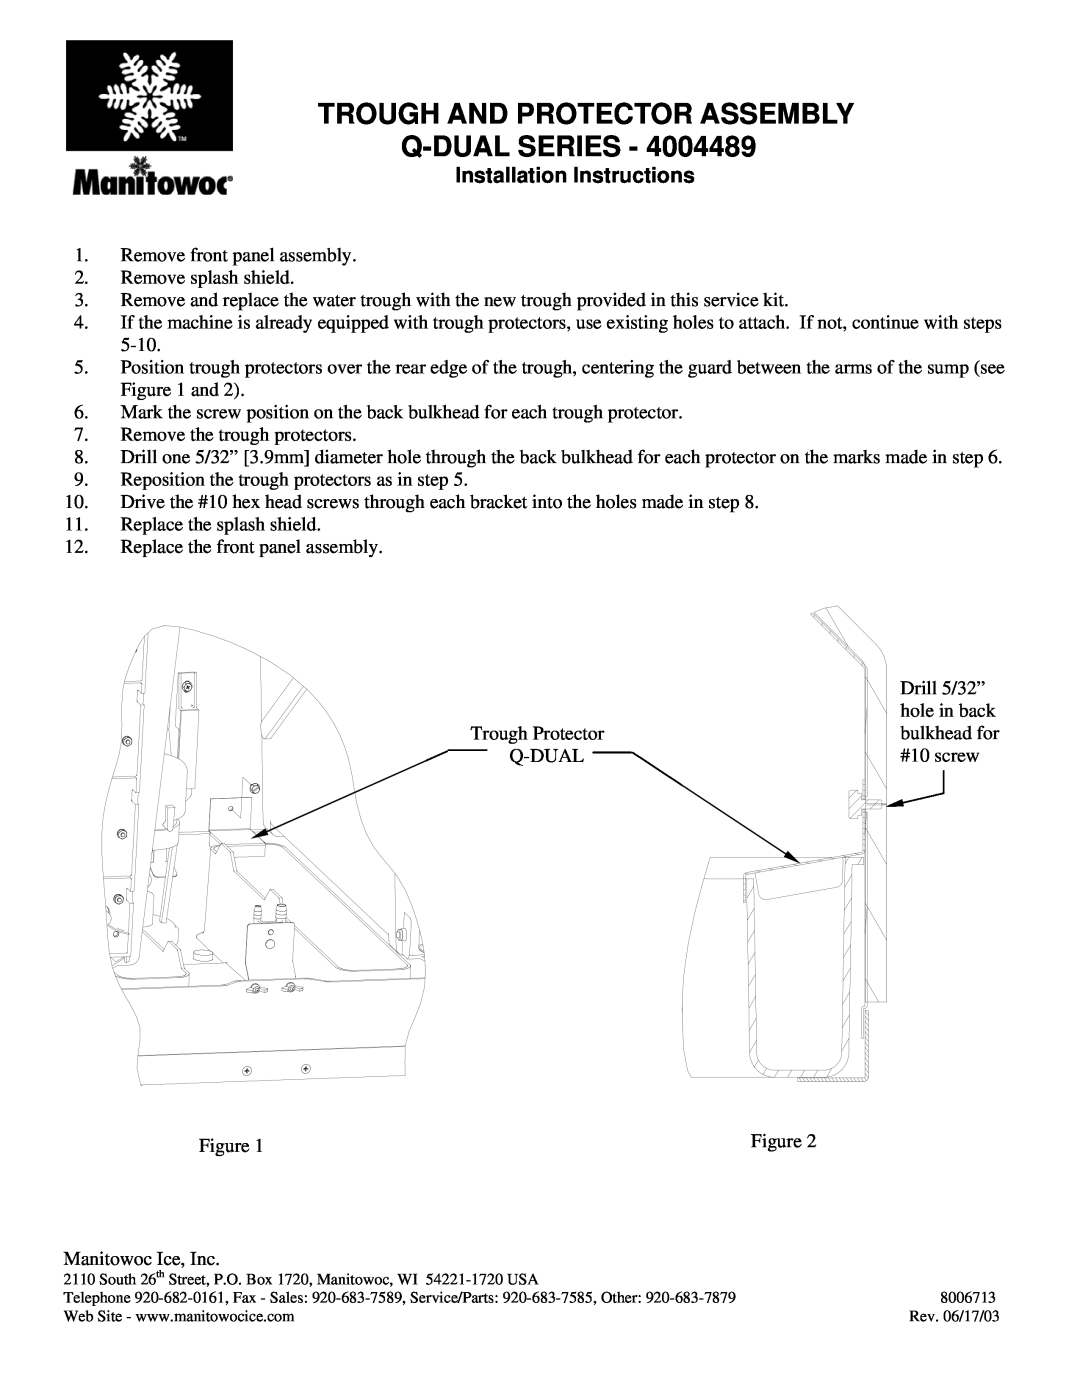 Manitowoc Ice 4004489 installation instructions Trough And Protector Assembly Q-Dual Series, Installation Instructions 